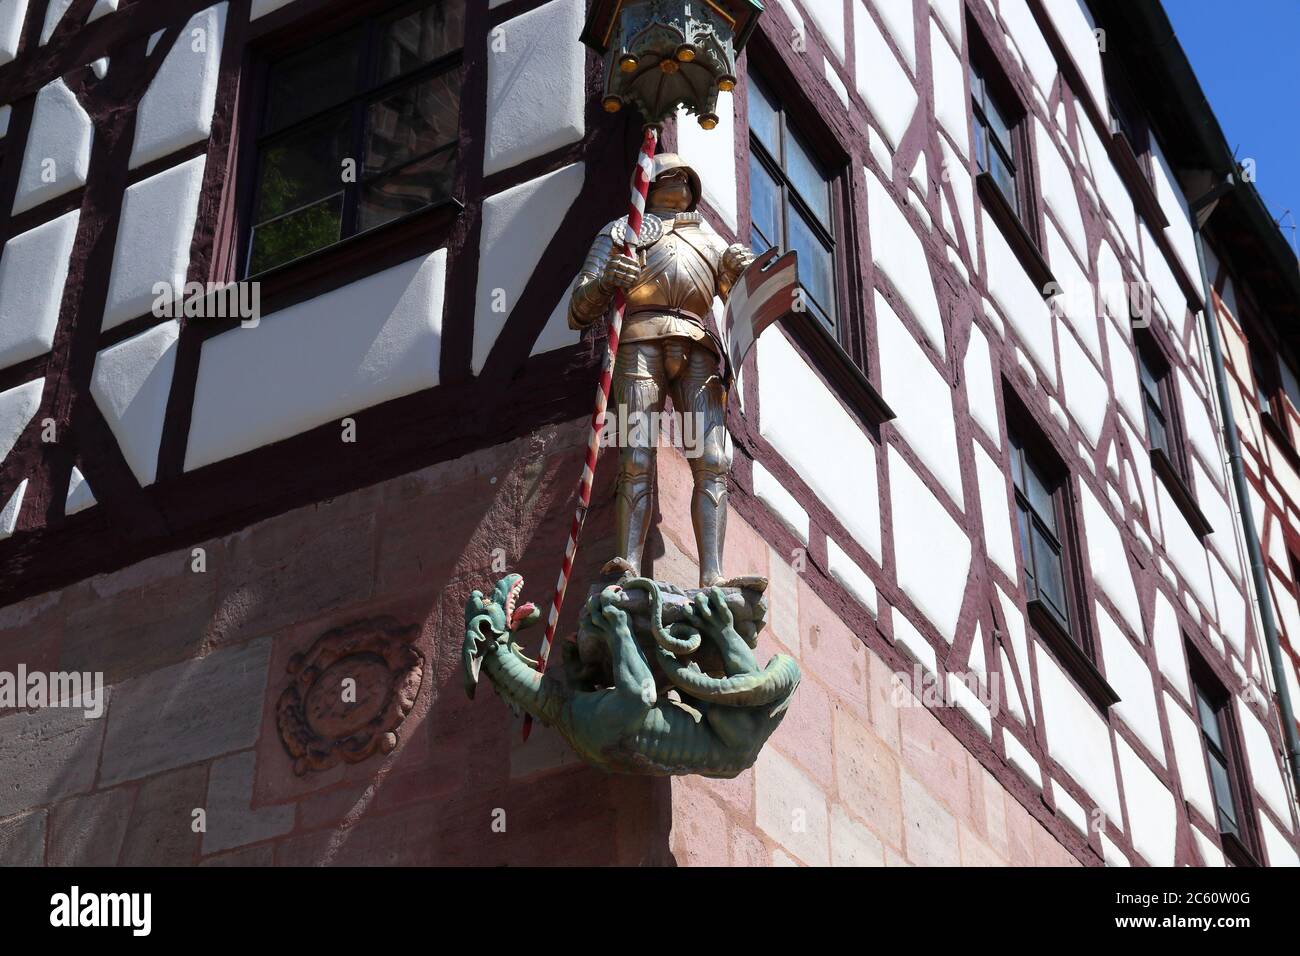 Nuremberg, Germany. 500 year old medieval statue of Saint George the knight, slaying a dragon. Stock Photo